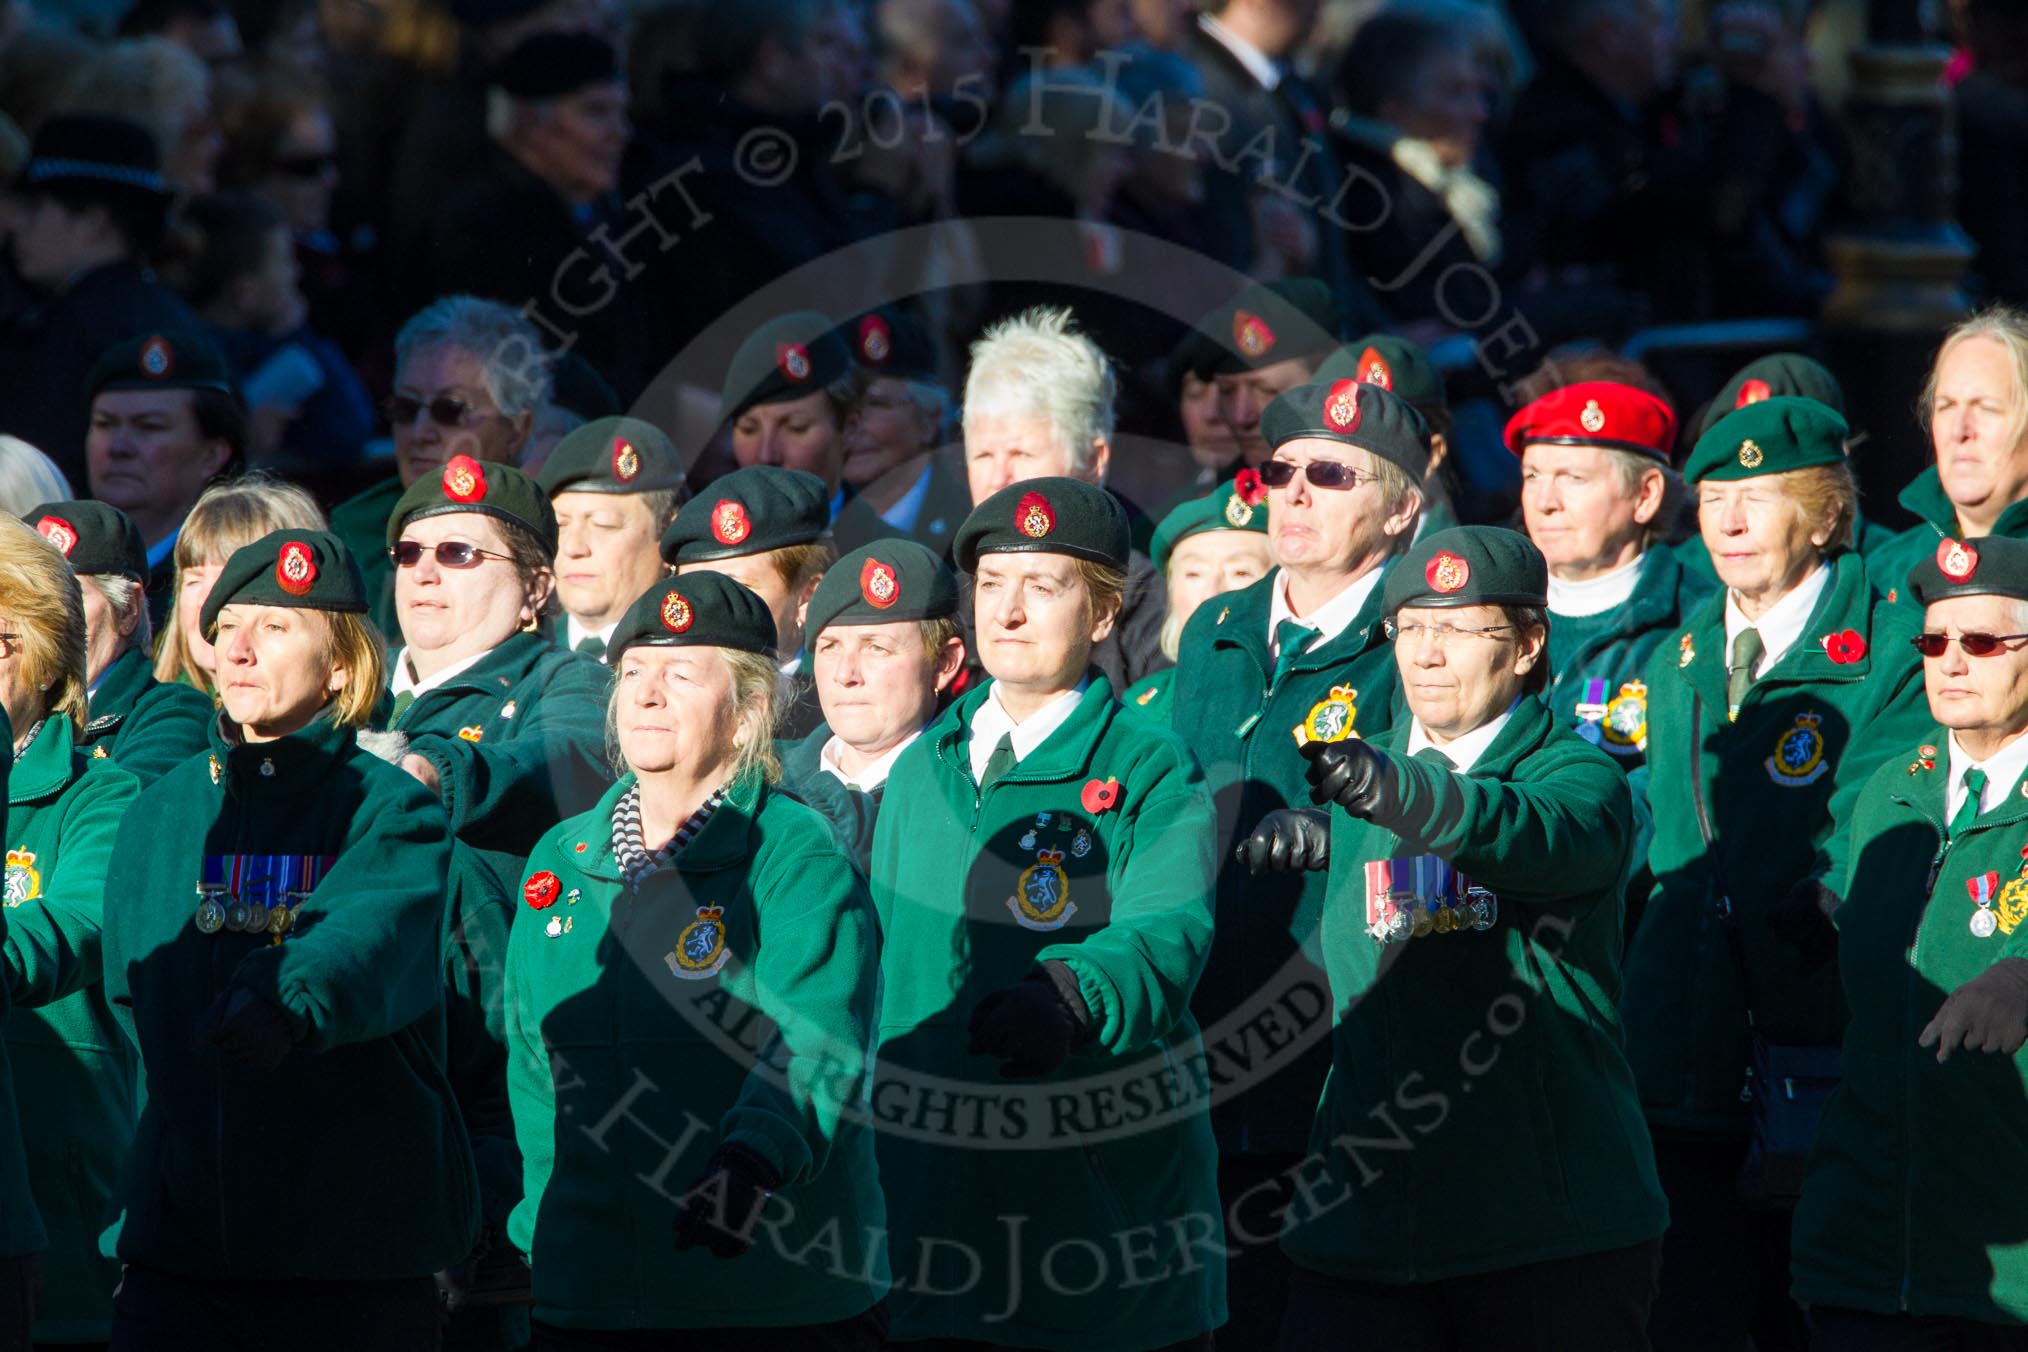 Remembrance Sunday Cenotaph March Past 2013: B15 - Women's Royal Army Corps Association..
Press stand opposite the Foreign Office building, Whitehall, London SW1,
London,
Greater London,
United Kingdom,
on 10 November 2013 at 12:01, image #1410